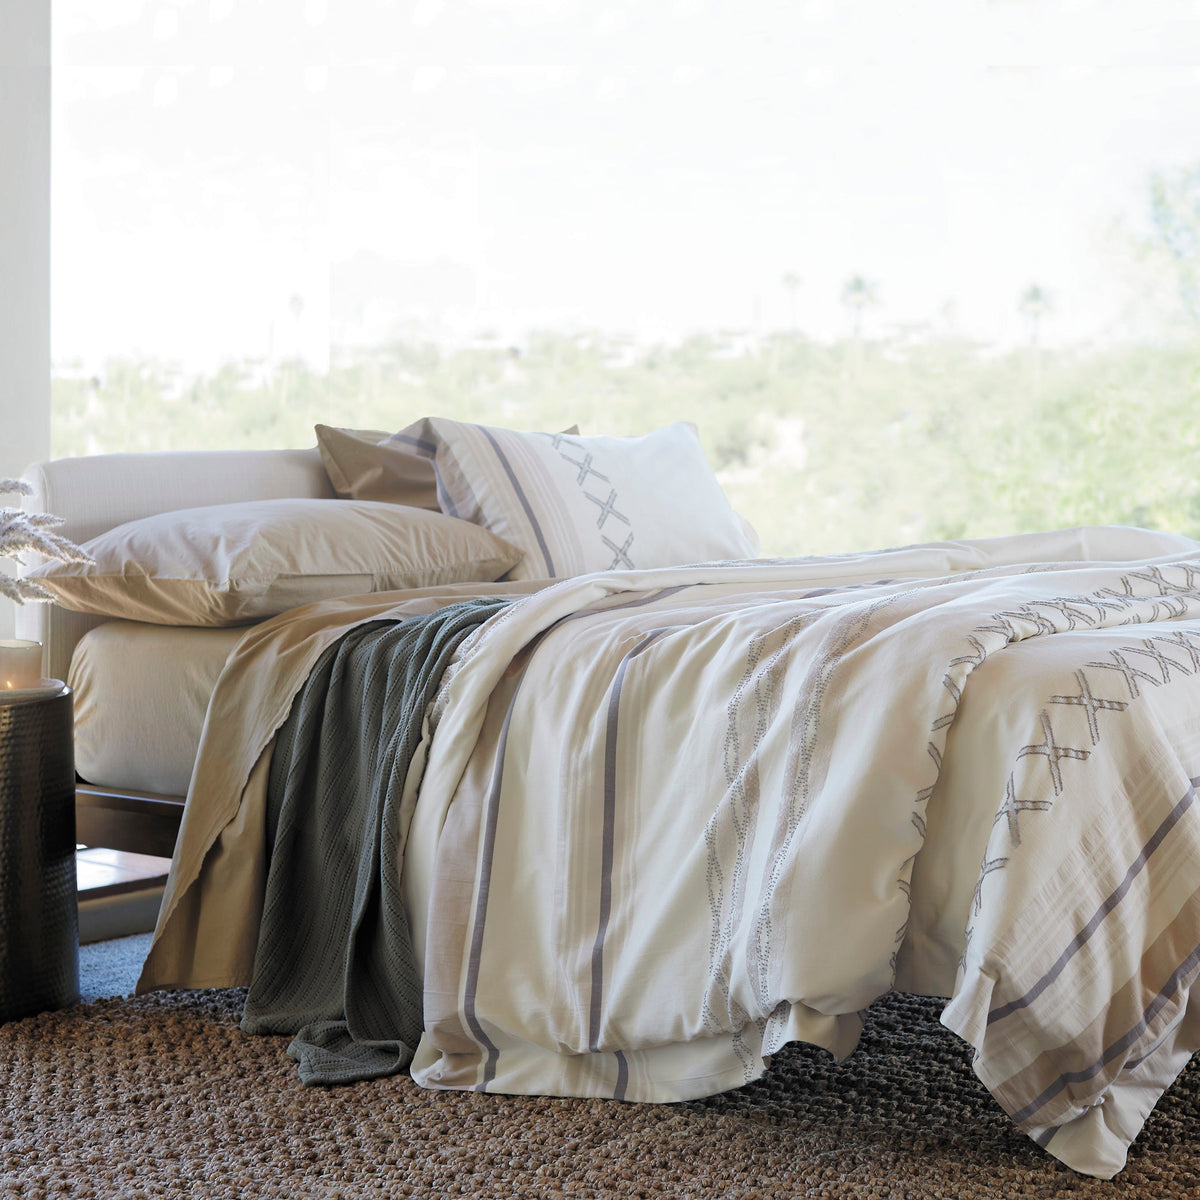 Image of a made bed with a large window behind it. The bed showcases Ochre Garment Washed Percale Sheets, an Agave Ridgeback Coverlet, and a Sonoran Duvet Cover.